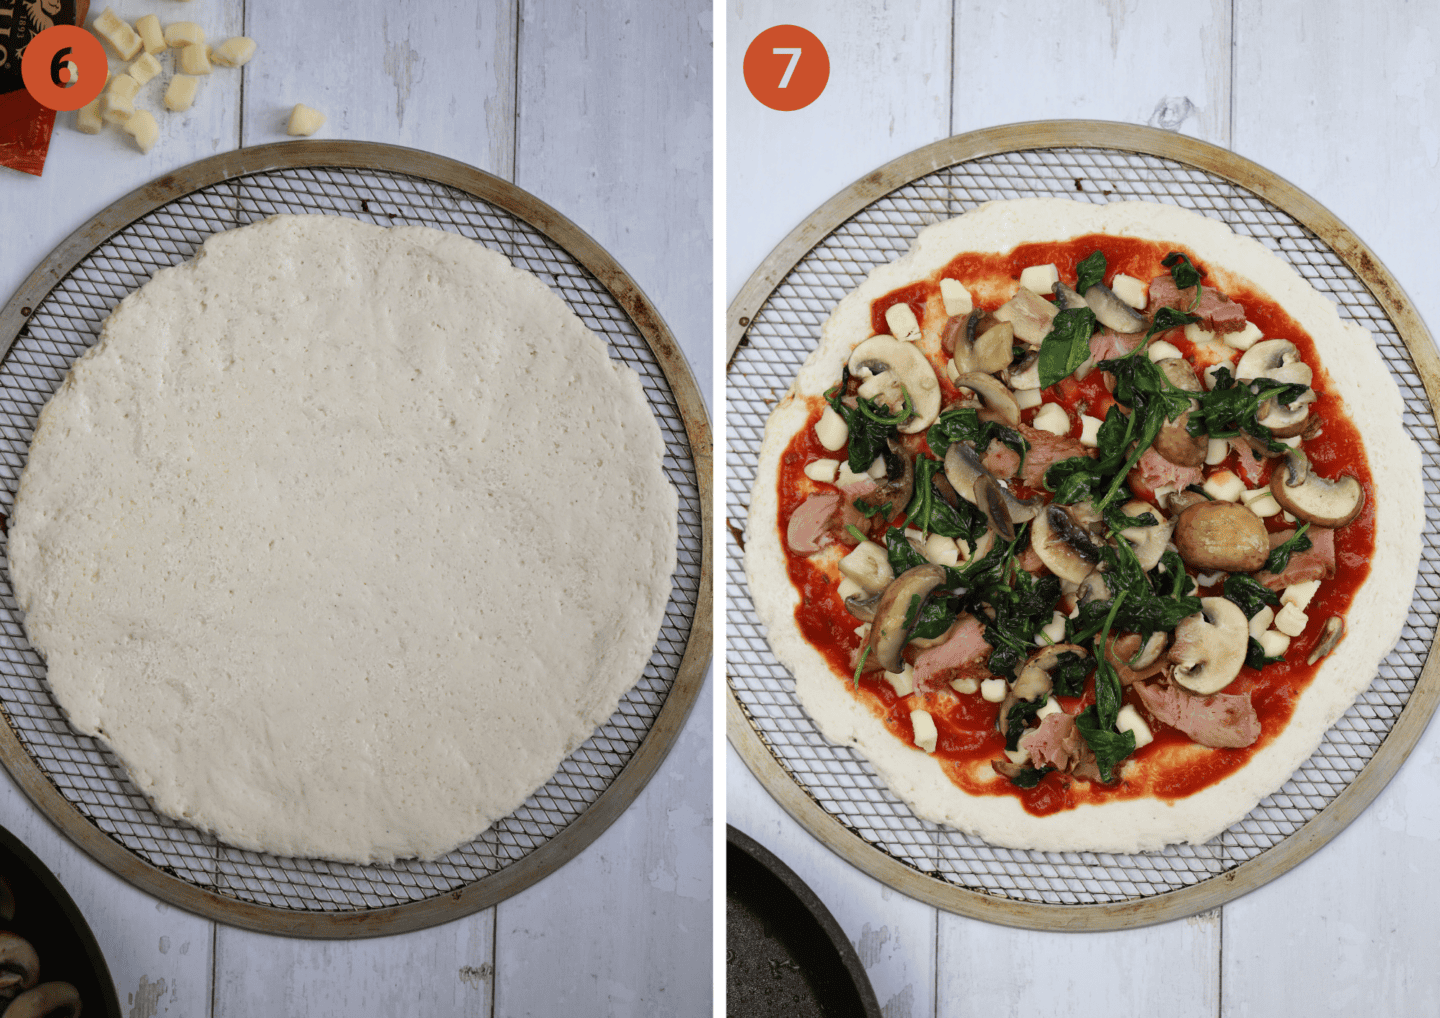 The shaped pizza dough and (right) with toppings before baking.